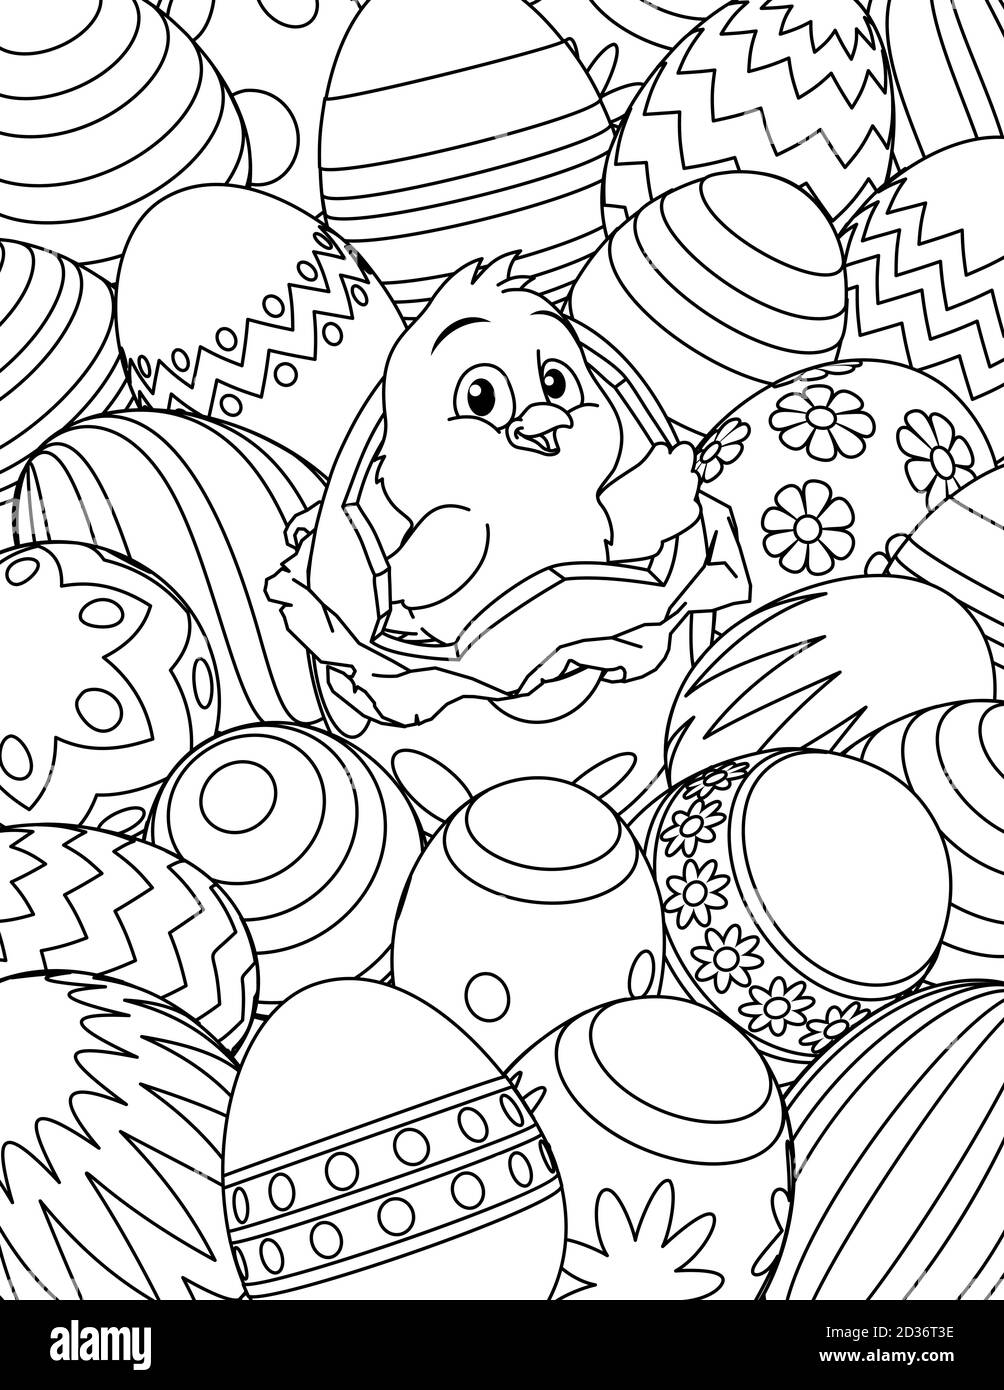 Easter Chick Eggs Coloring Book Page Cartoon Stock Vector